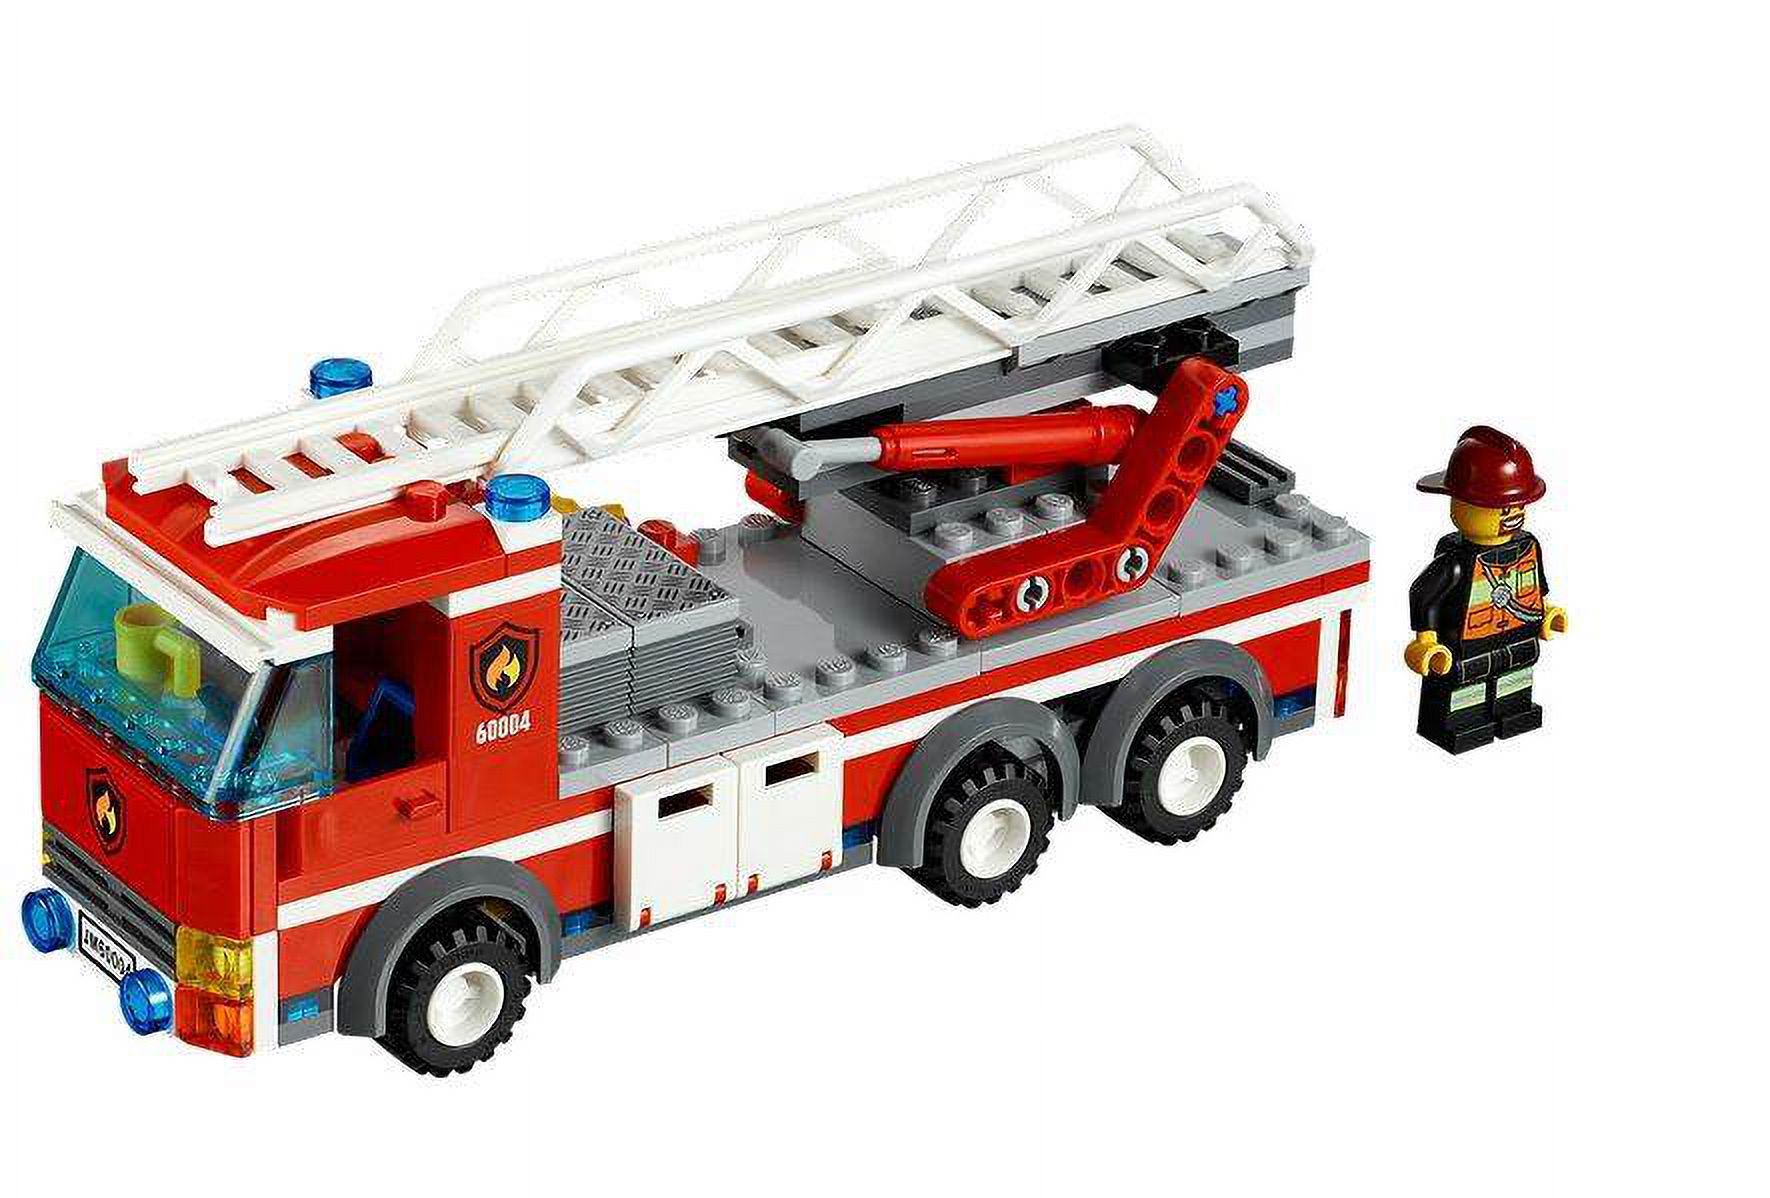 LEGO City Fire Station 60004 - image 4 of 8